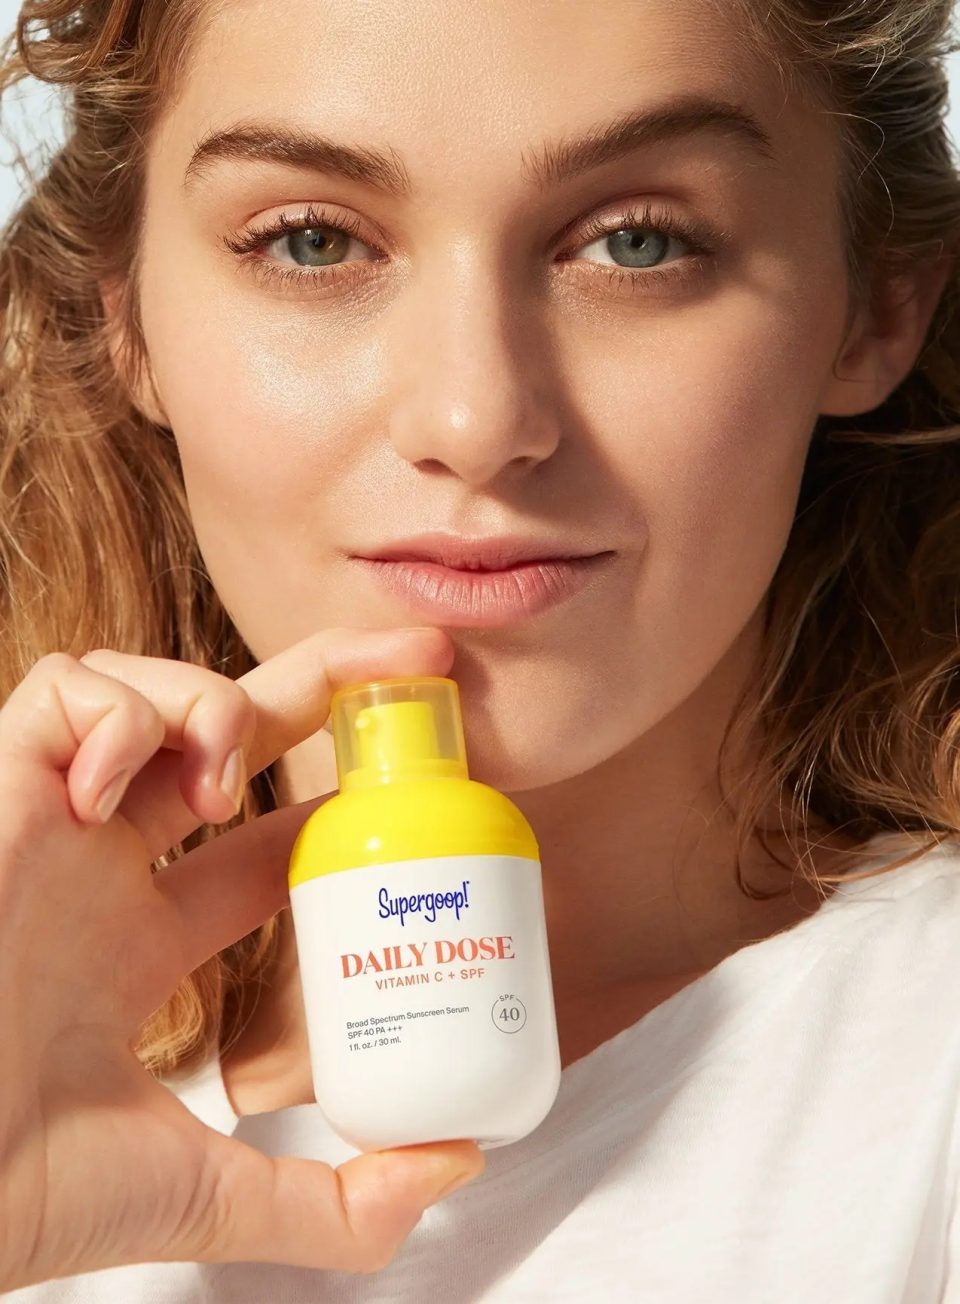 supergoop-daily-dose-vitamin-c-spf-40-serum-model-with-pack